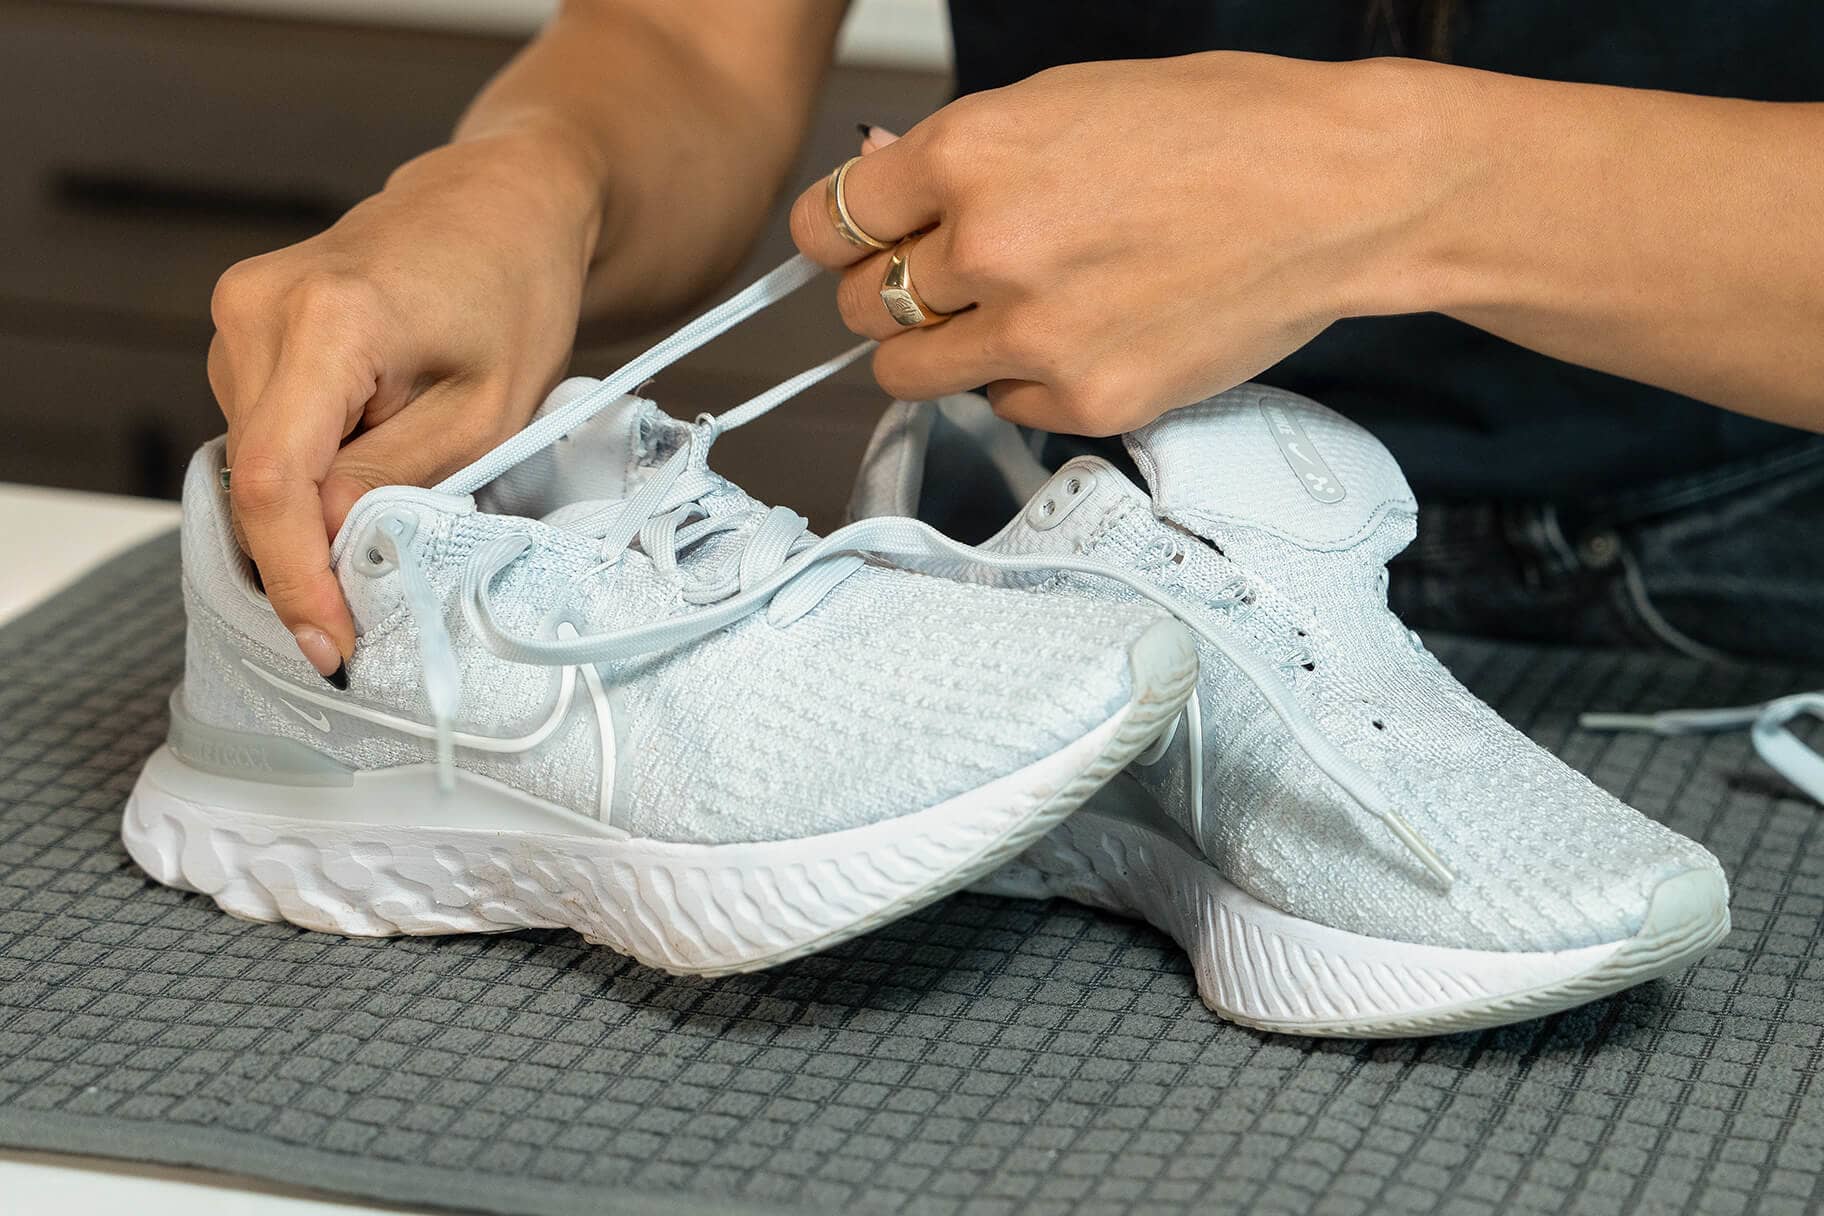 Simple Cleaning Methods to Clean White Mesh Shoes? - Hood MWR